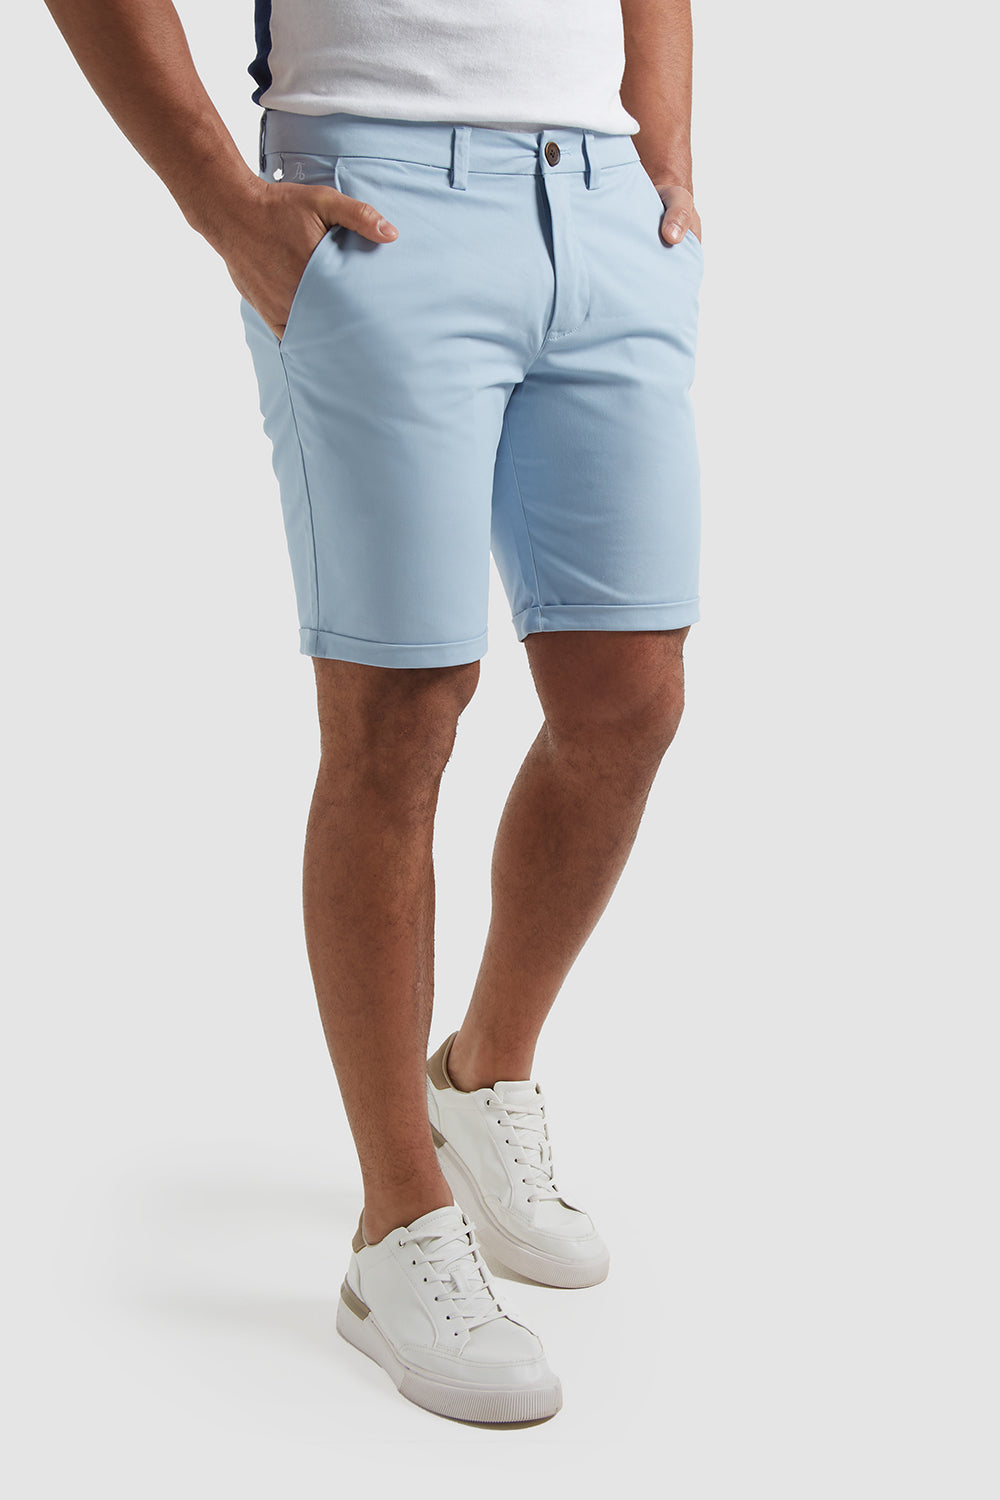 Muscle Fit Chino Shorts in Pale Blue - TAILORED ATHLETE - ROW